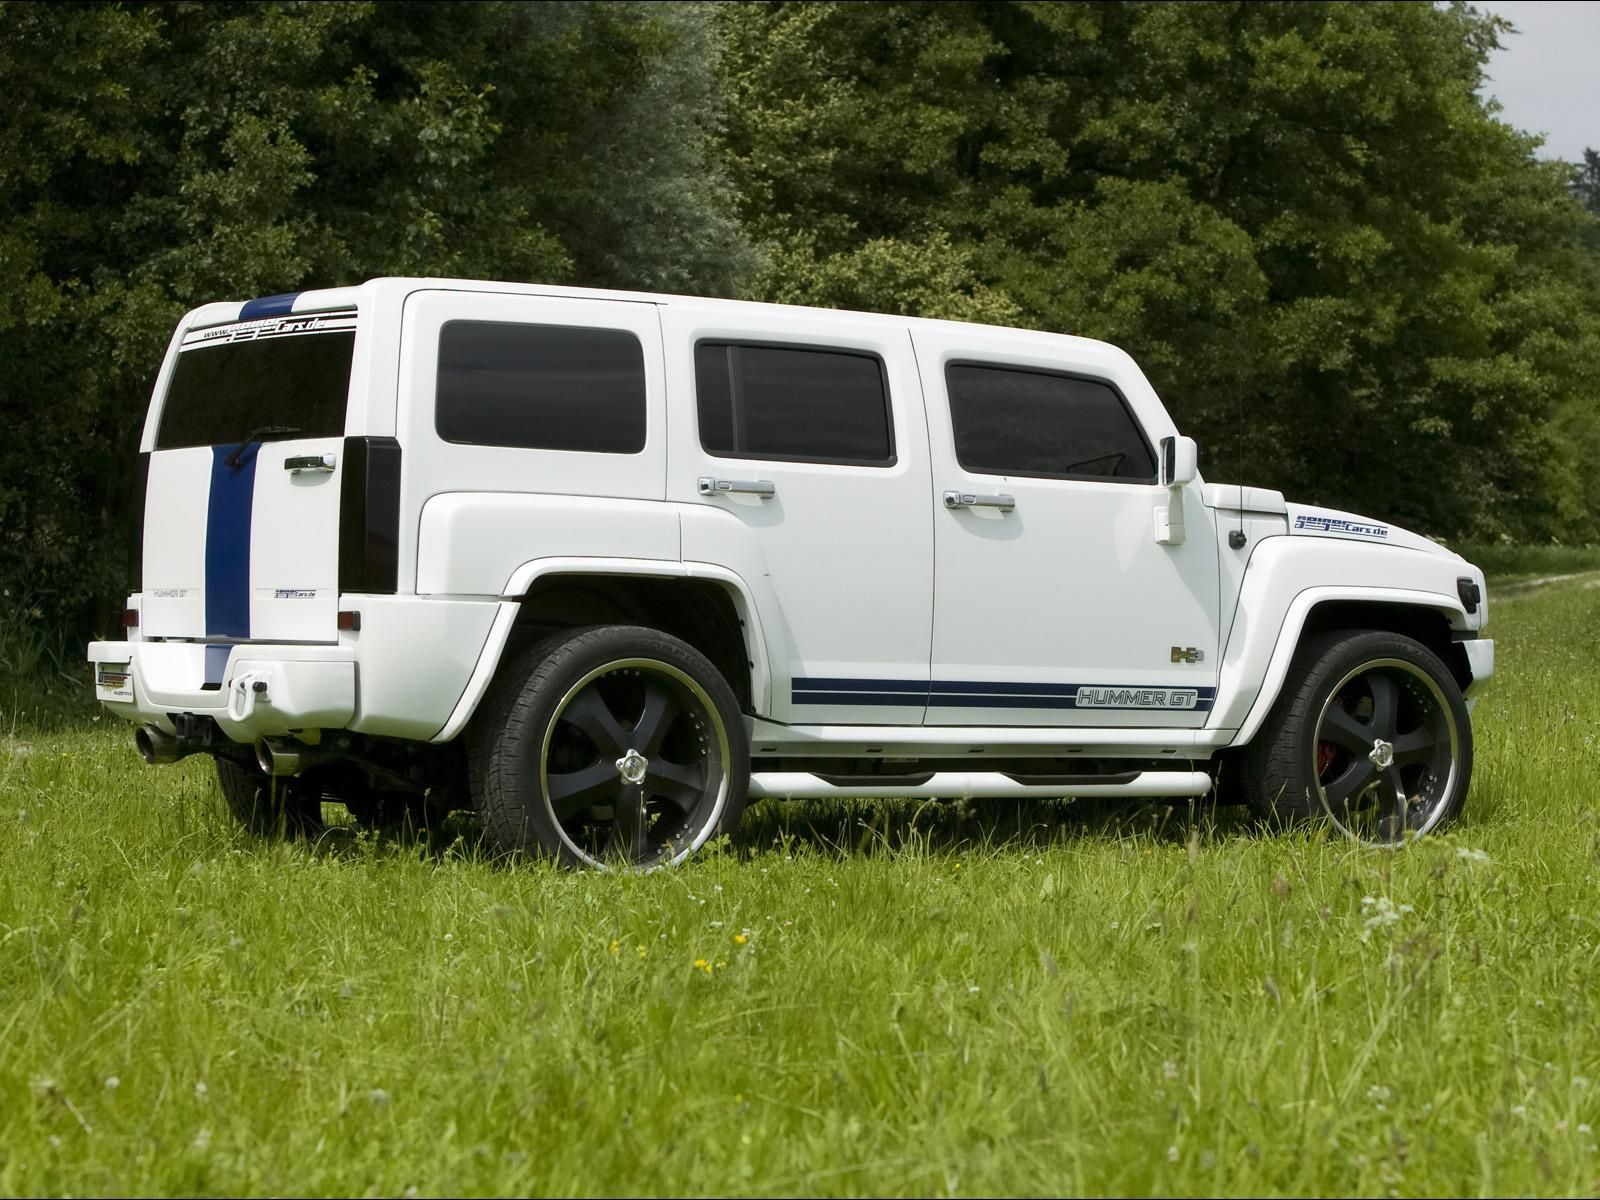 2008 Hummer H3 GT by GeigerCars